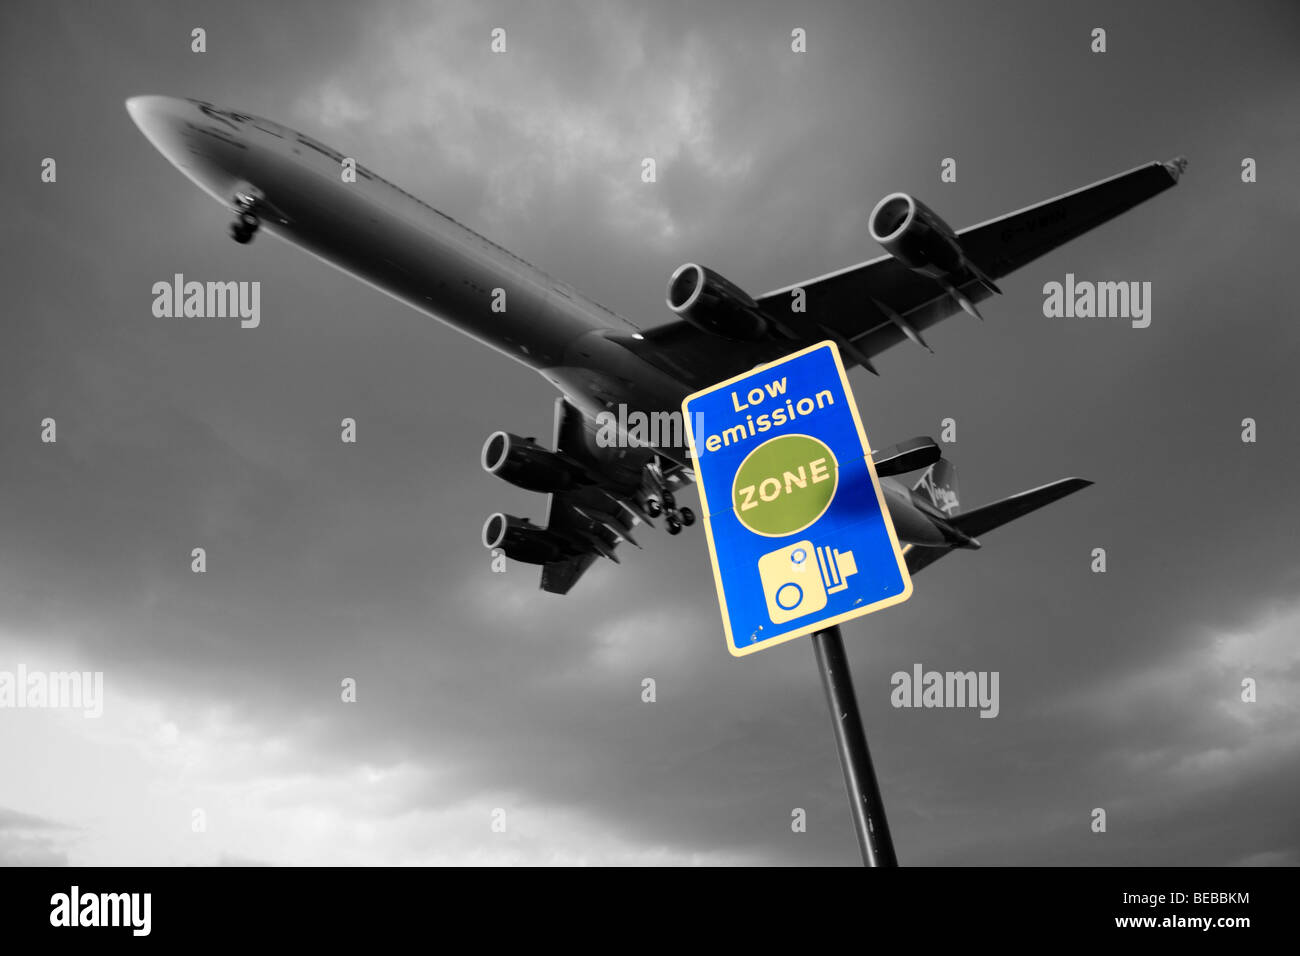 A Virgin Atlantic areplane passes over 'Low Emission Zone' road sign beside London's Heathrow Airport, UK. B&W & Colour mix. Stock Photo